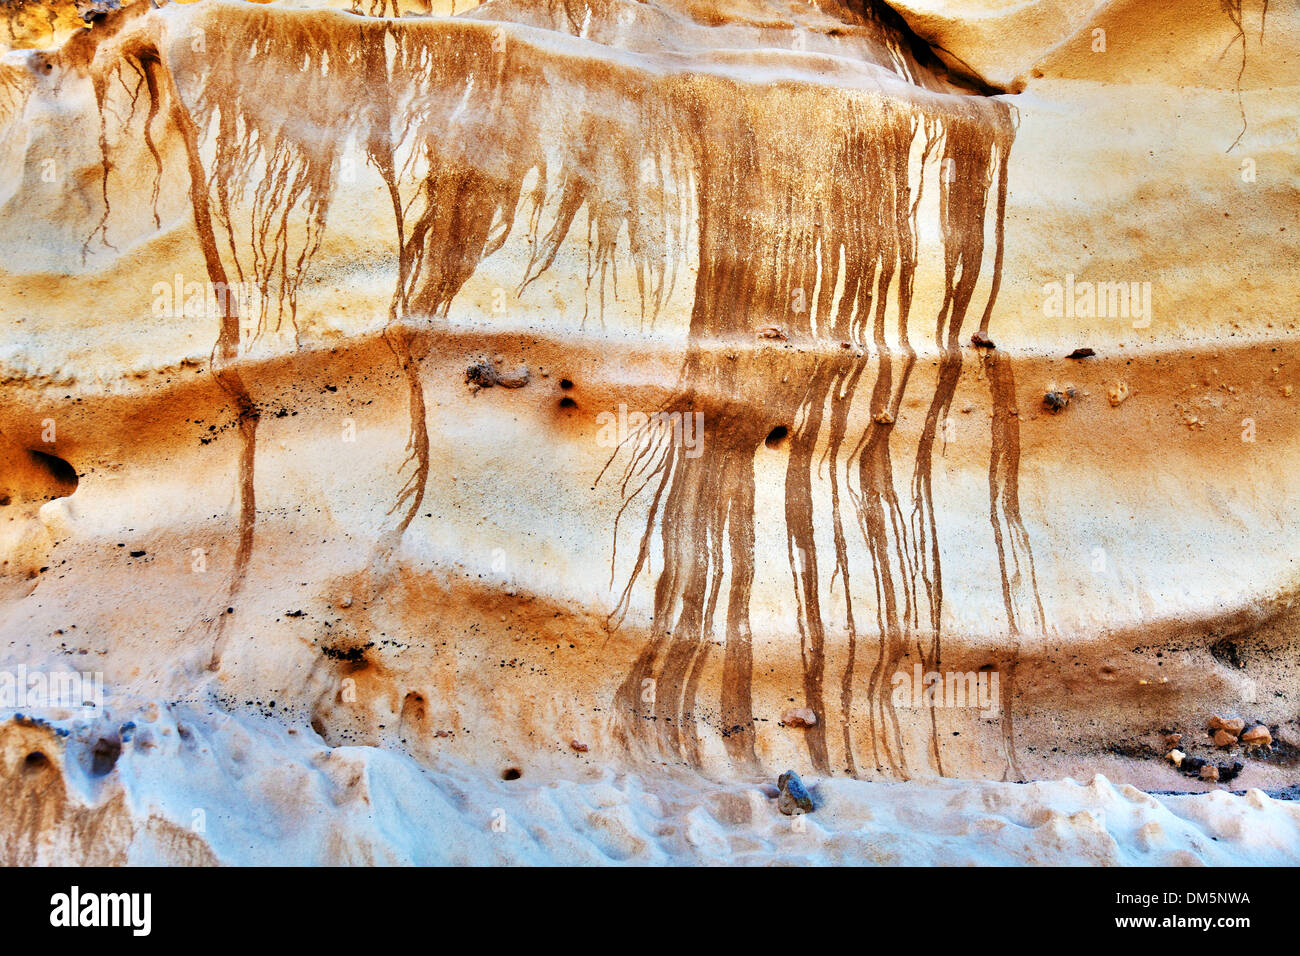 texture of geological formation of sandstone Stock Photo